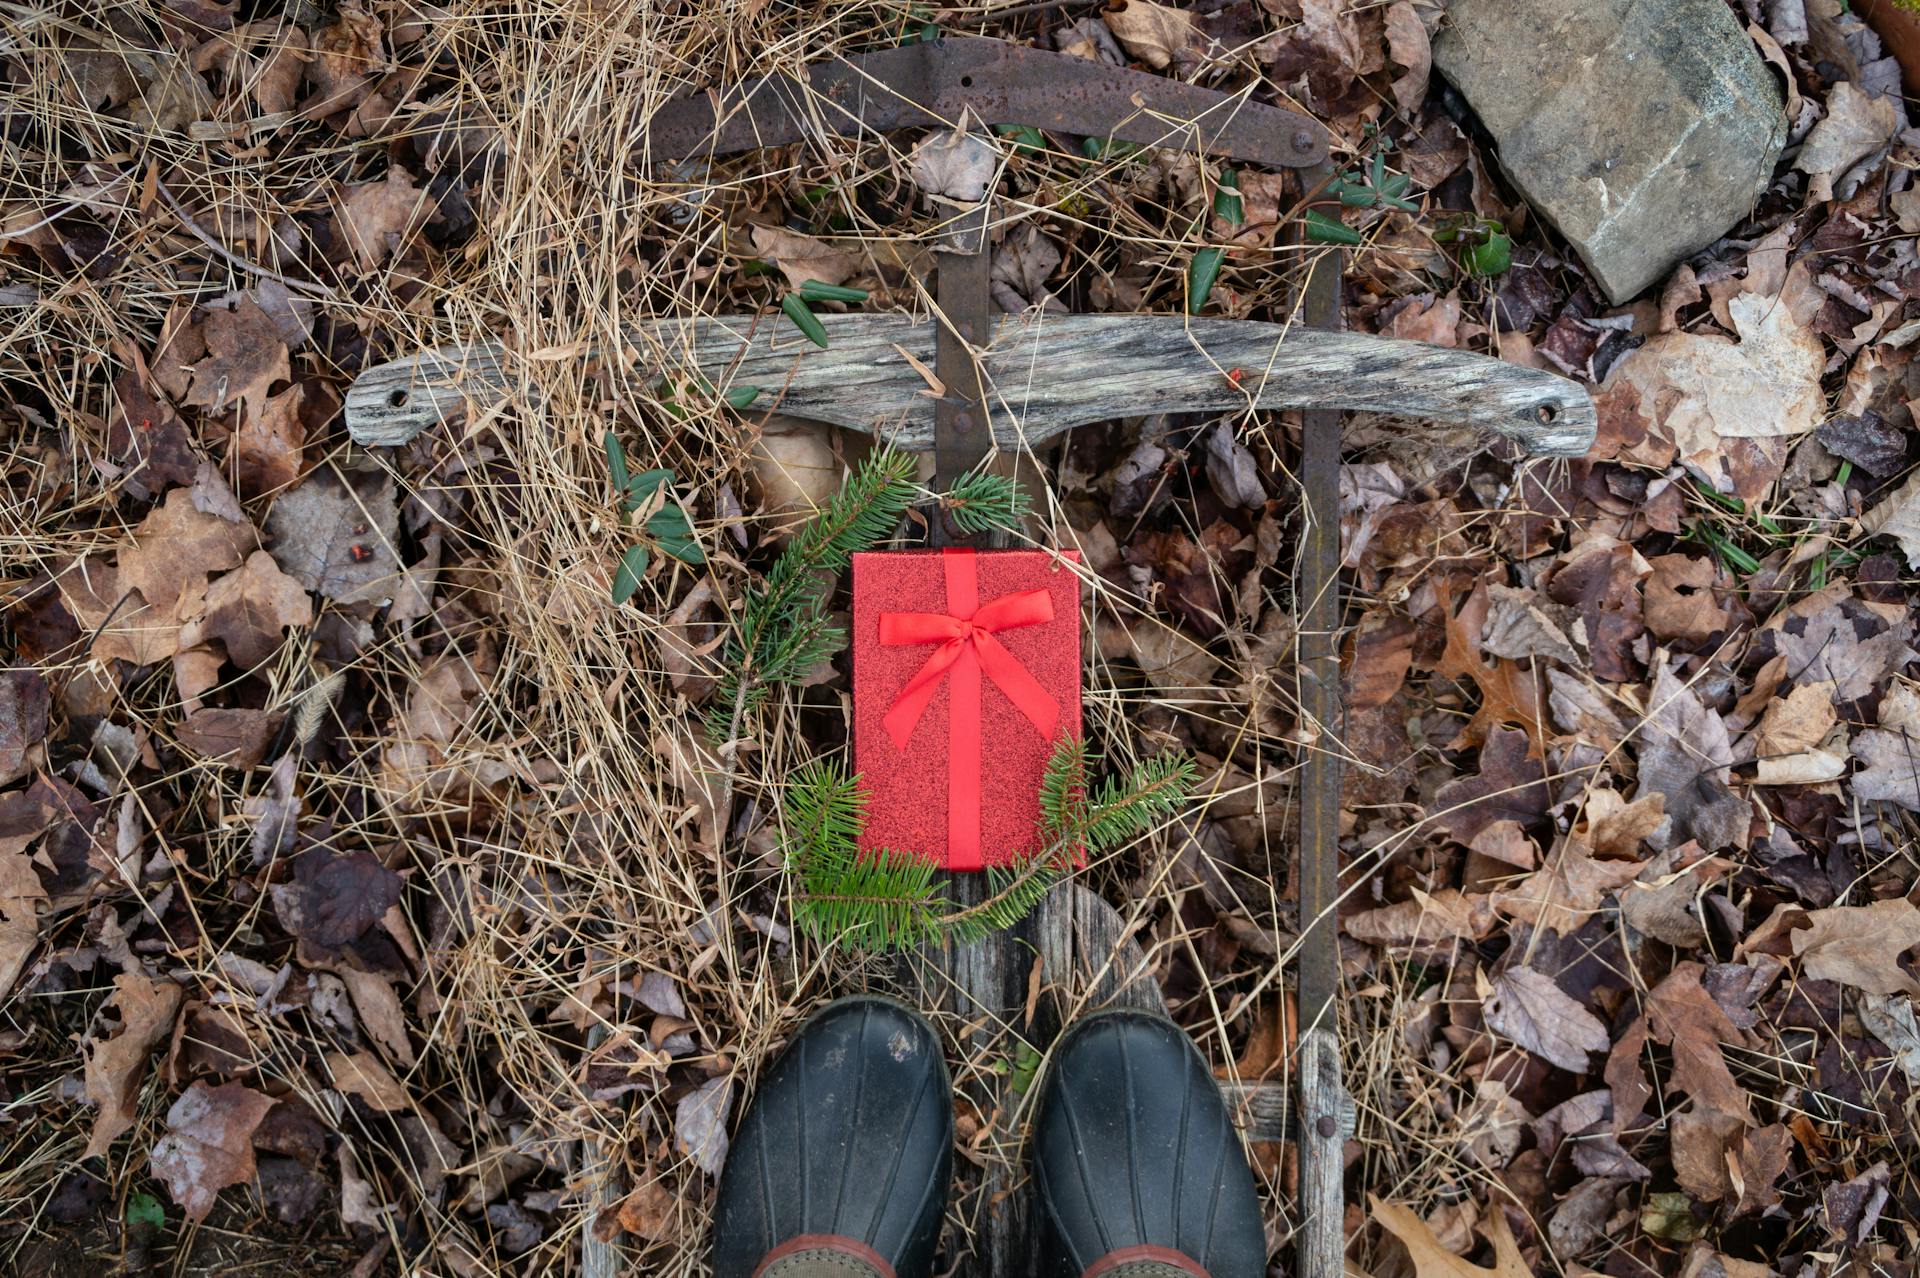 Red glittery present box on a rustic old wooden sled with pine needles and a pair of boots